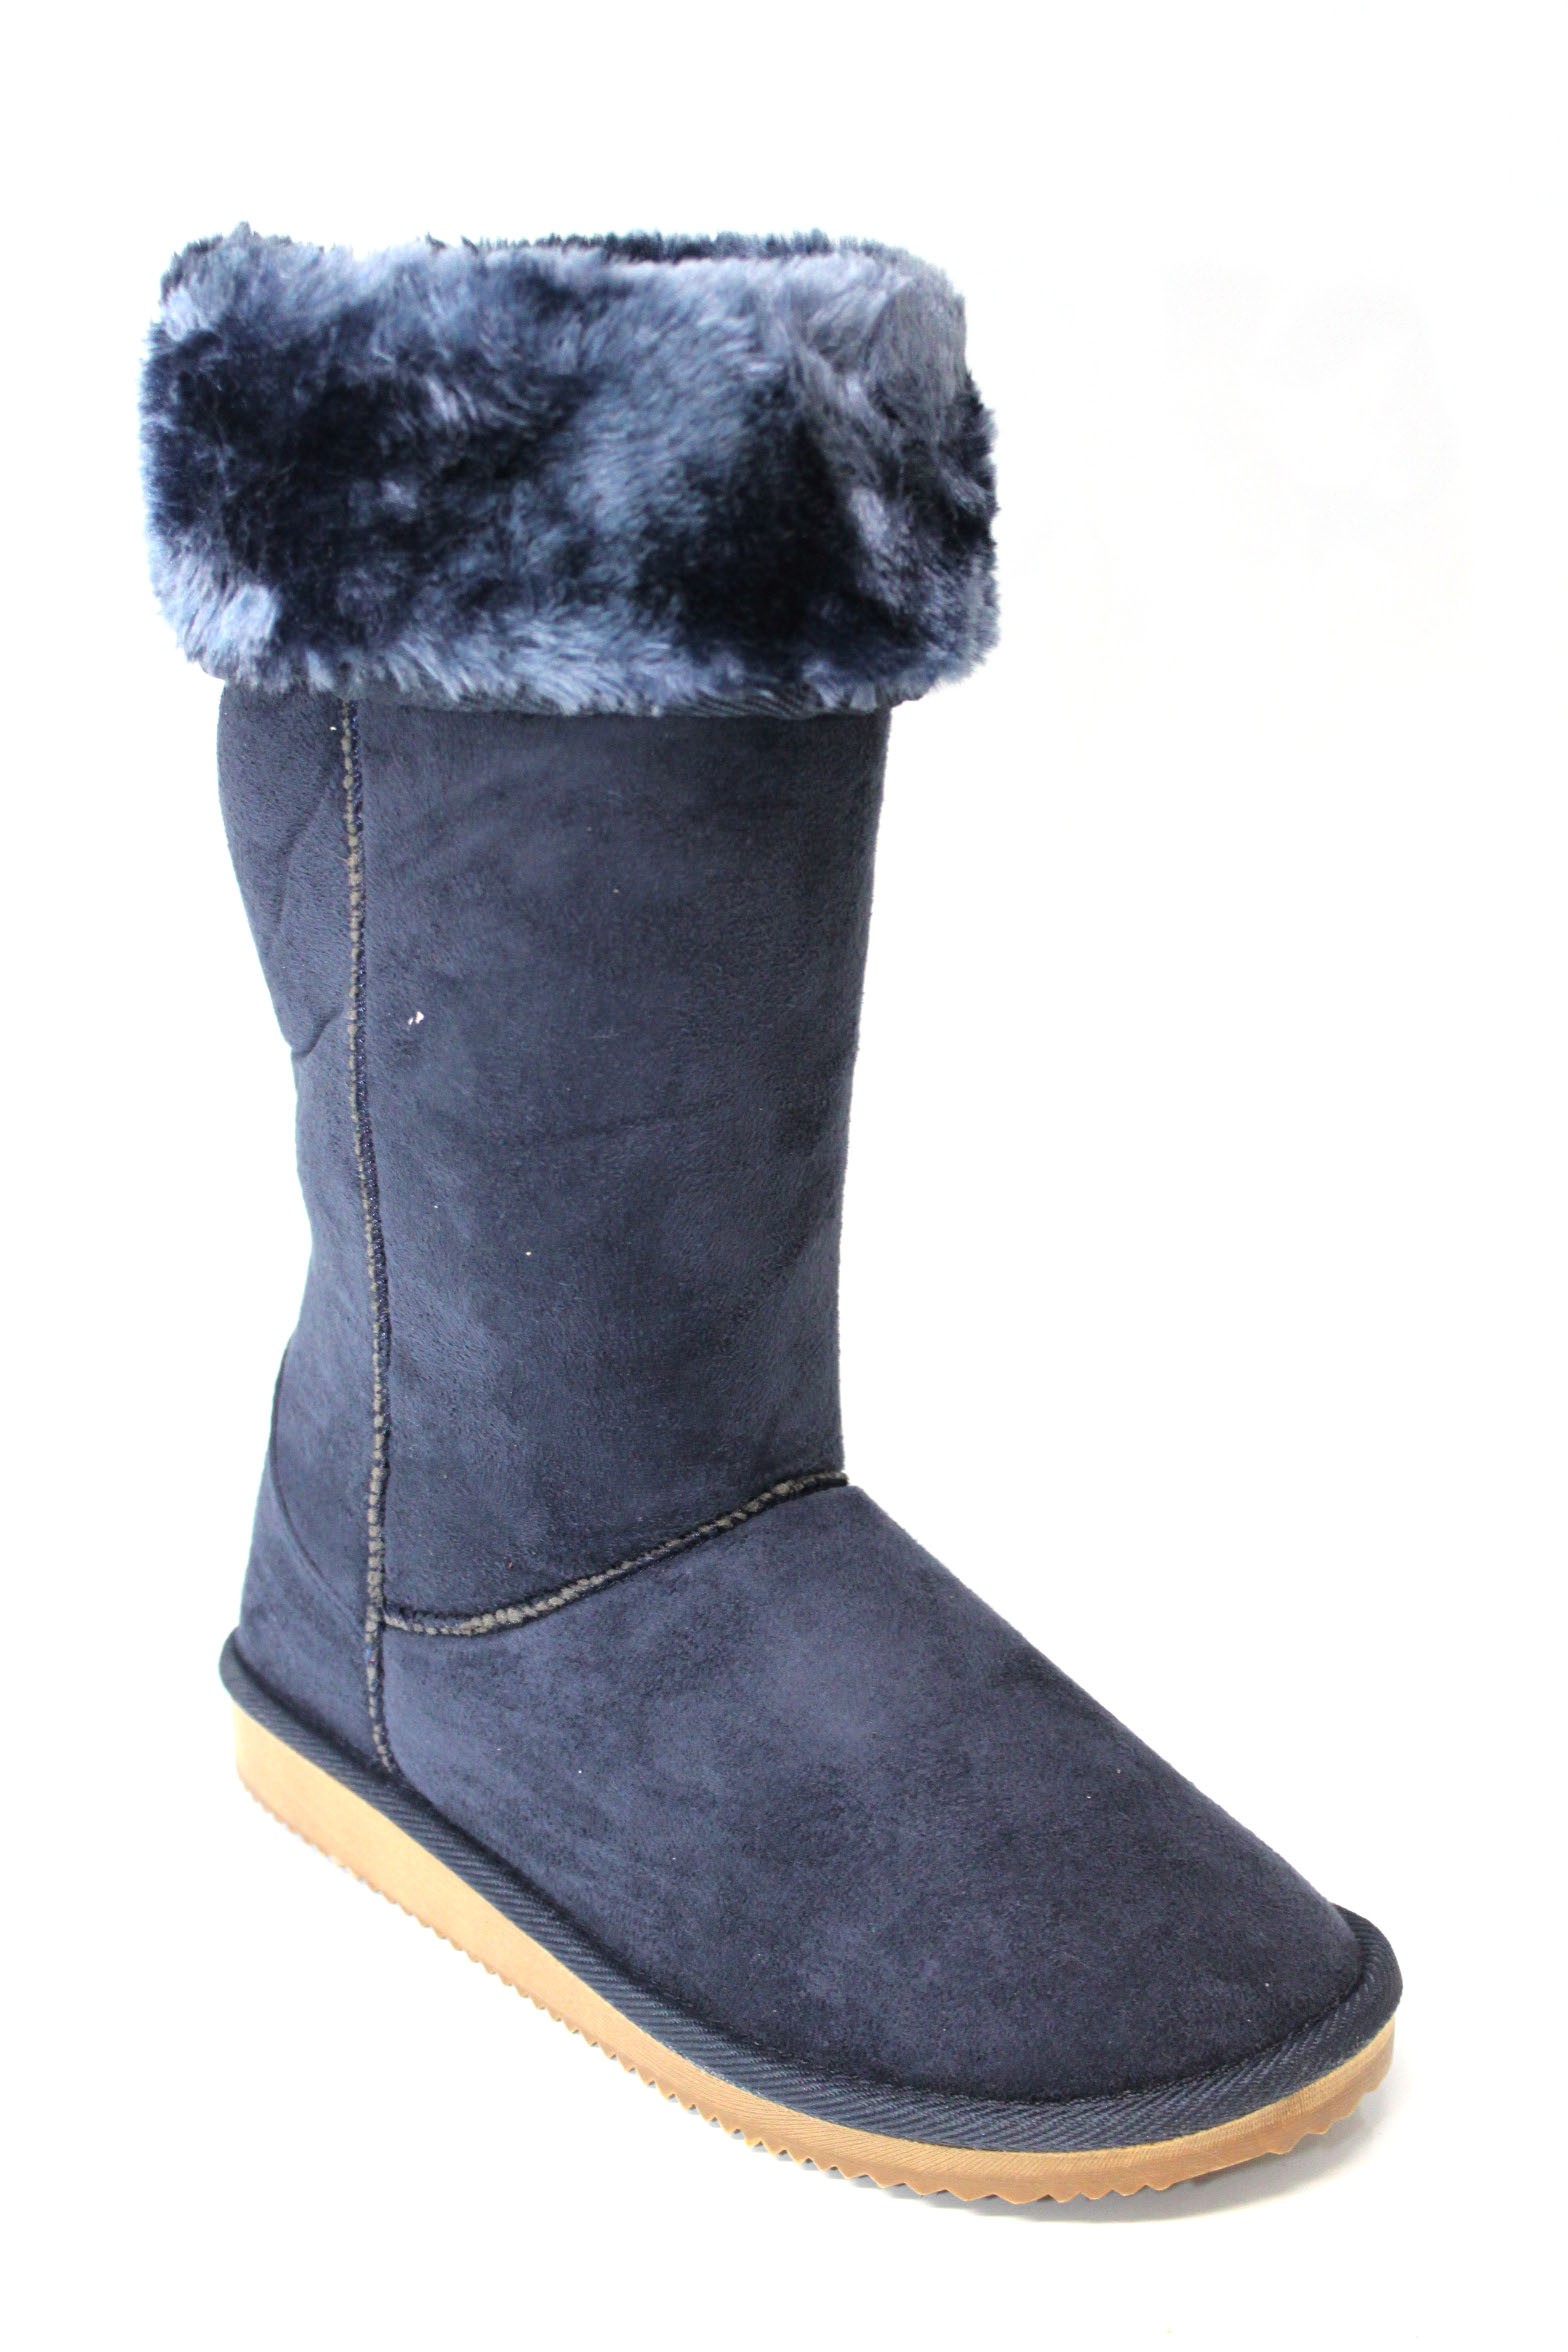 CLASSIC HUG BOOTS NAVY from £19.99 | Mr 